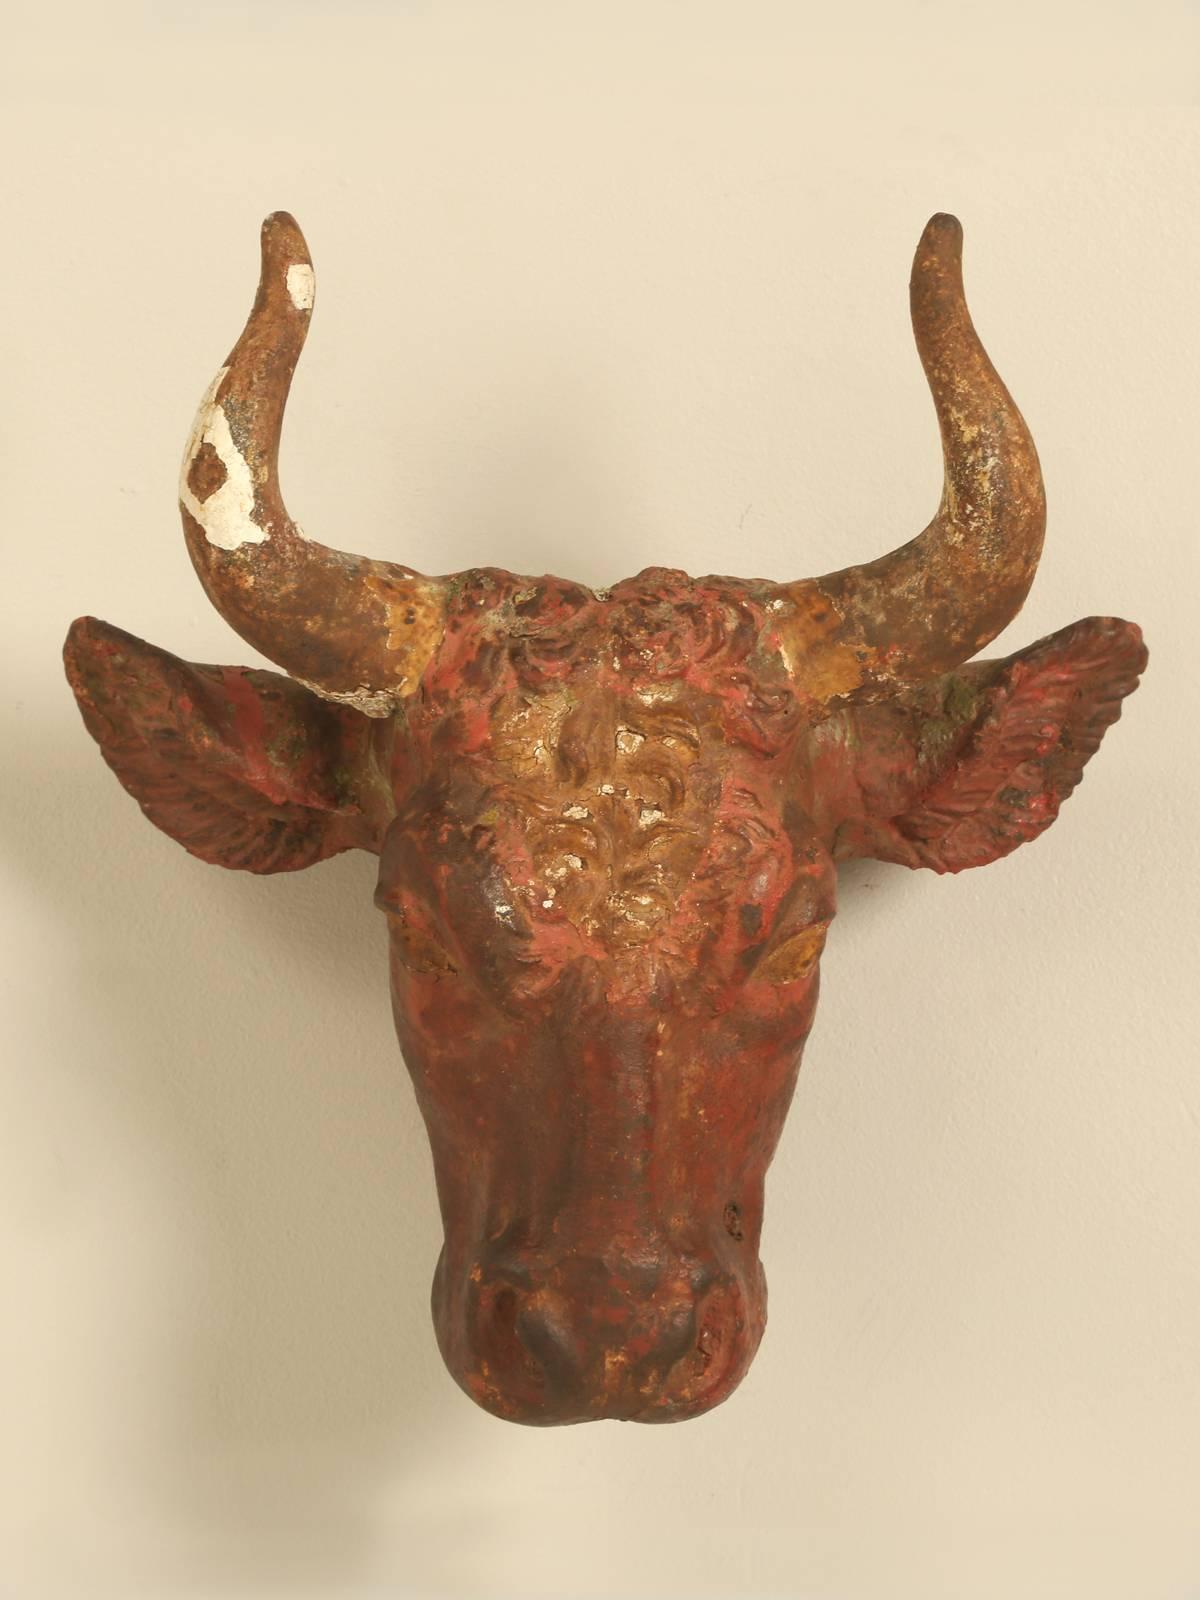 Antique French cast iron steer head, that was most likely used on the exterior of a butcher shop, or the French would call it a boucherie. We have been purchasing artifacts and accessories for Country French Kitchens, for over 25 years and this